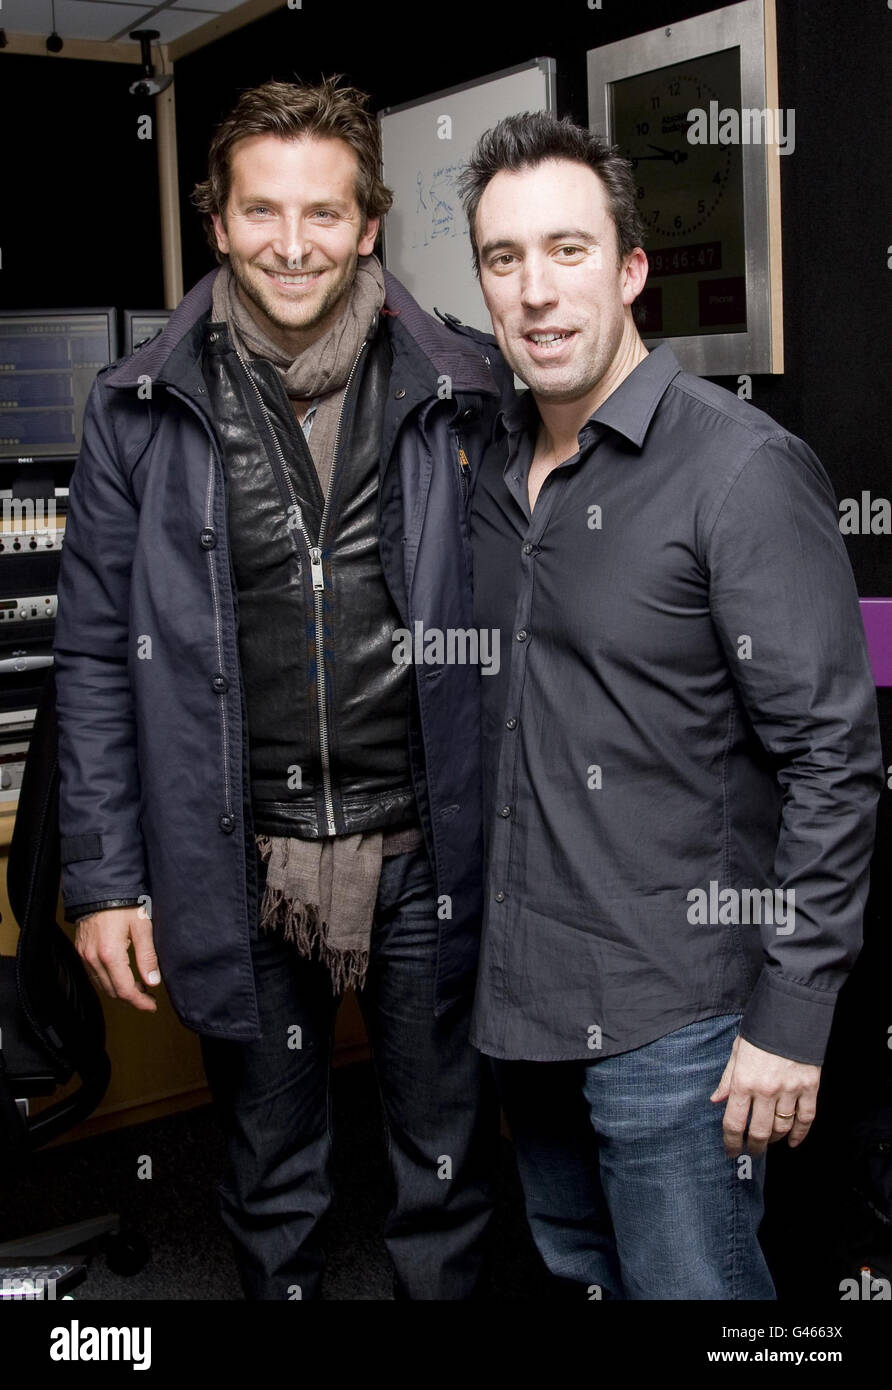 Bradley Cooper with Absolute Radio breakfast show presenter Christian O'Connell, at Absolute Radio in central London. Stock Photo